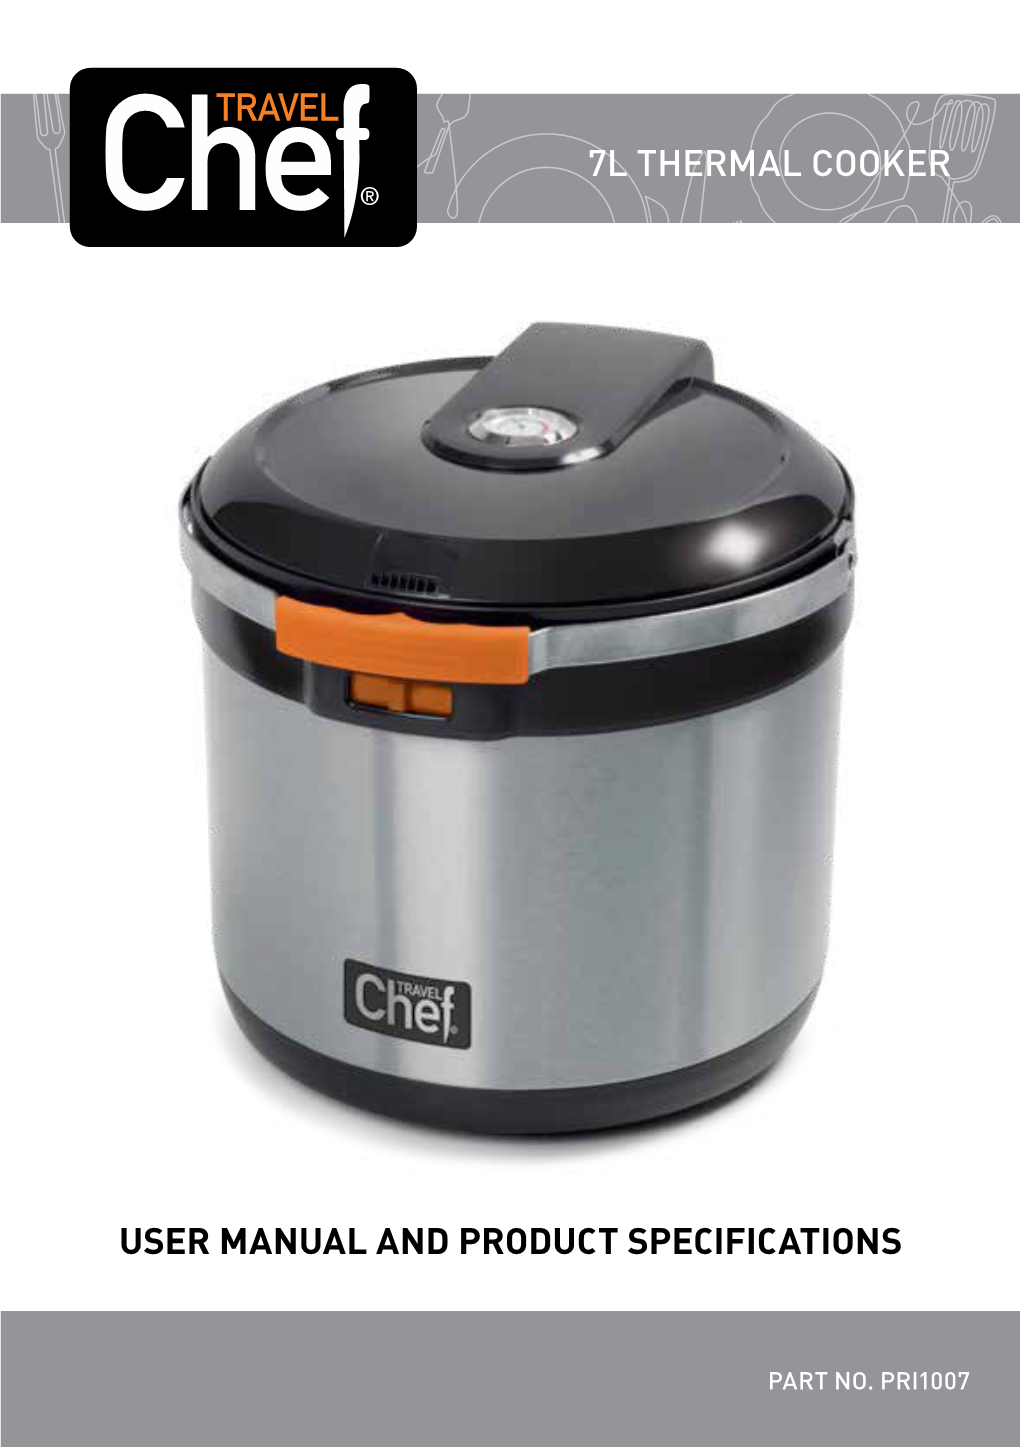 7L Thermal Cooker User Manual and Product